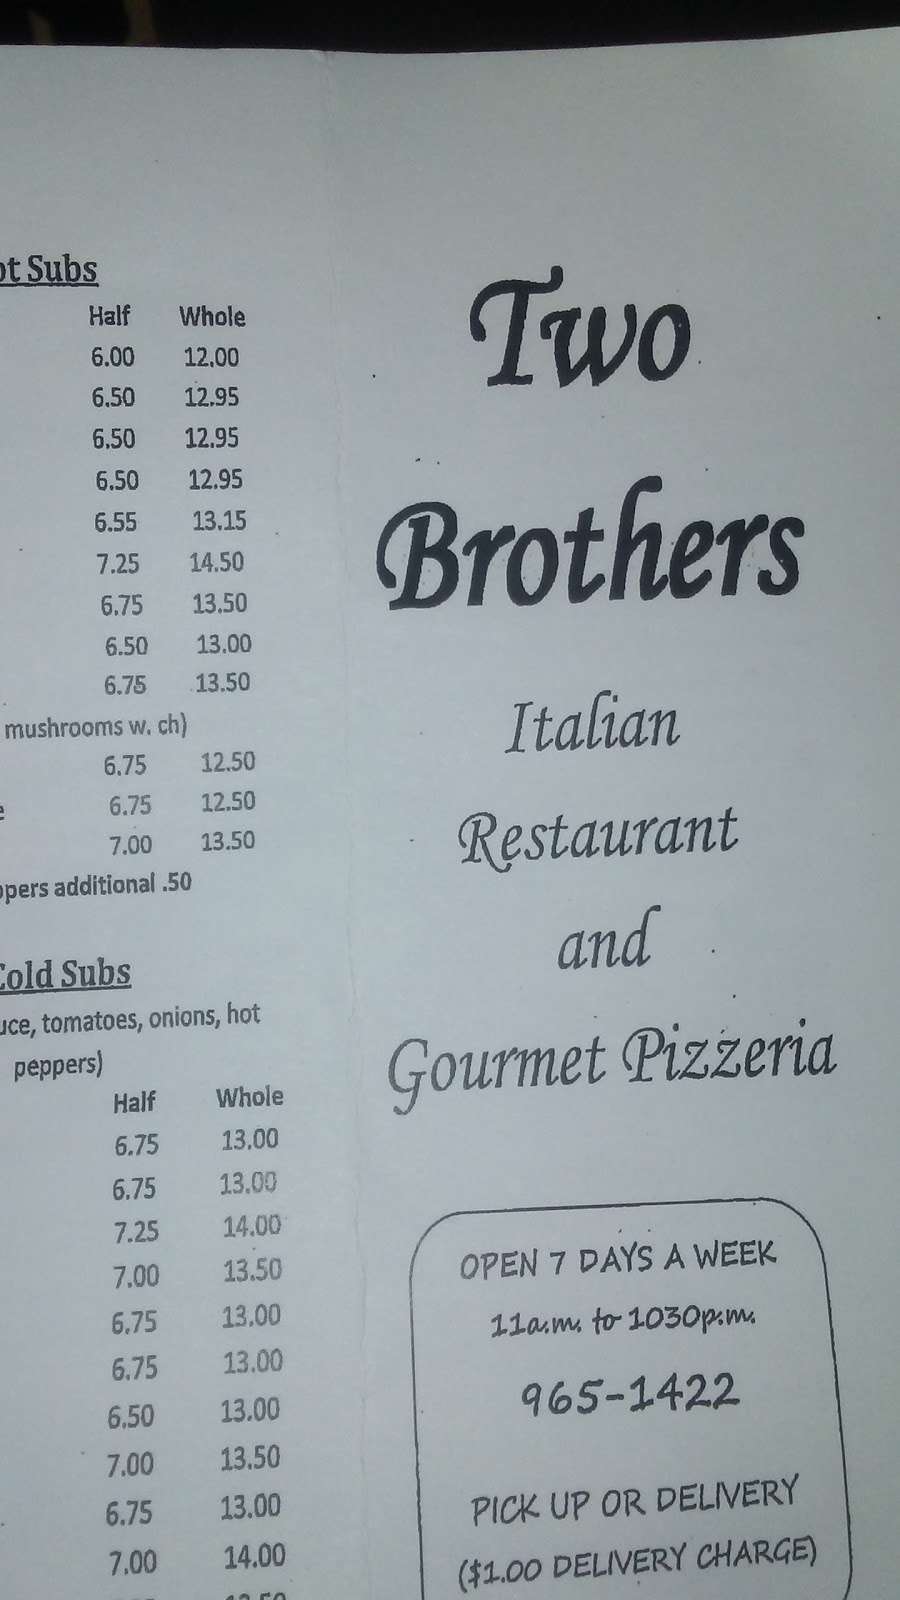 Two Brothers From Italy , Italian Restaurant & Gourmet Pizza | 269 W White Horse Pike, Galloway, NJ 08205 | Phone: (609) 965-1422